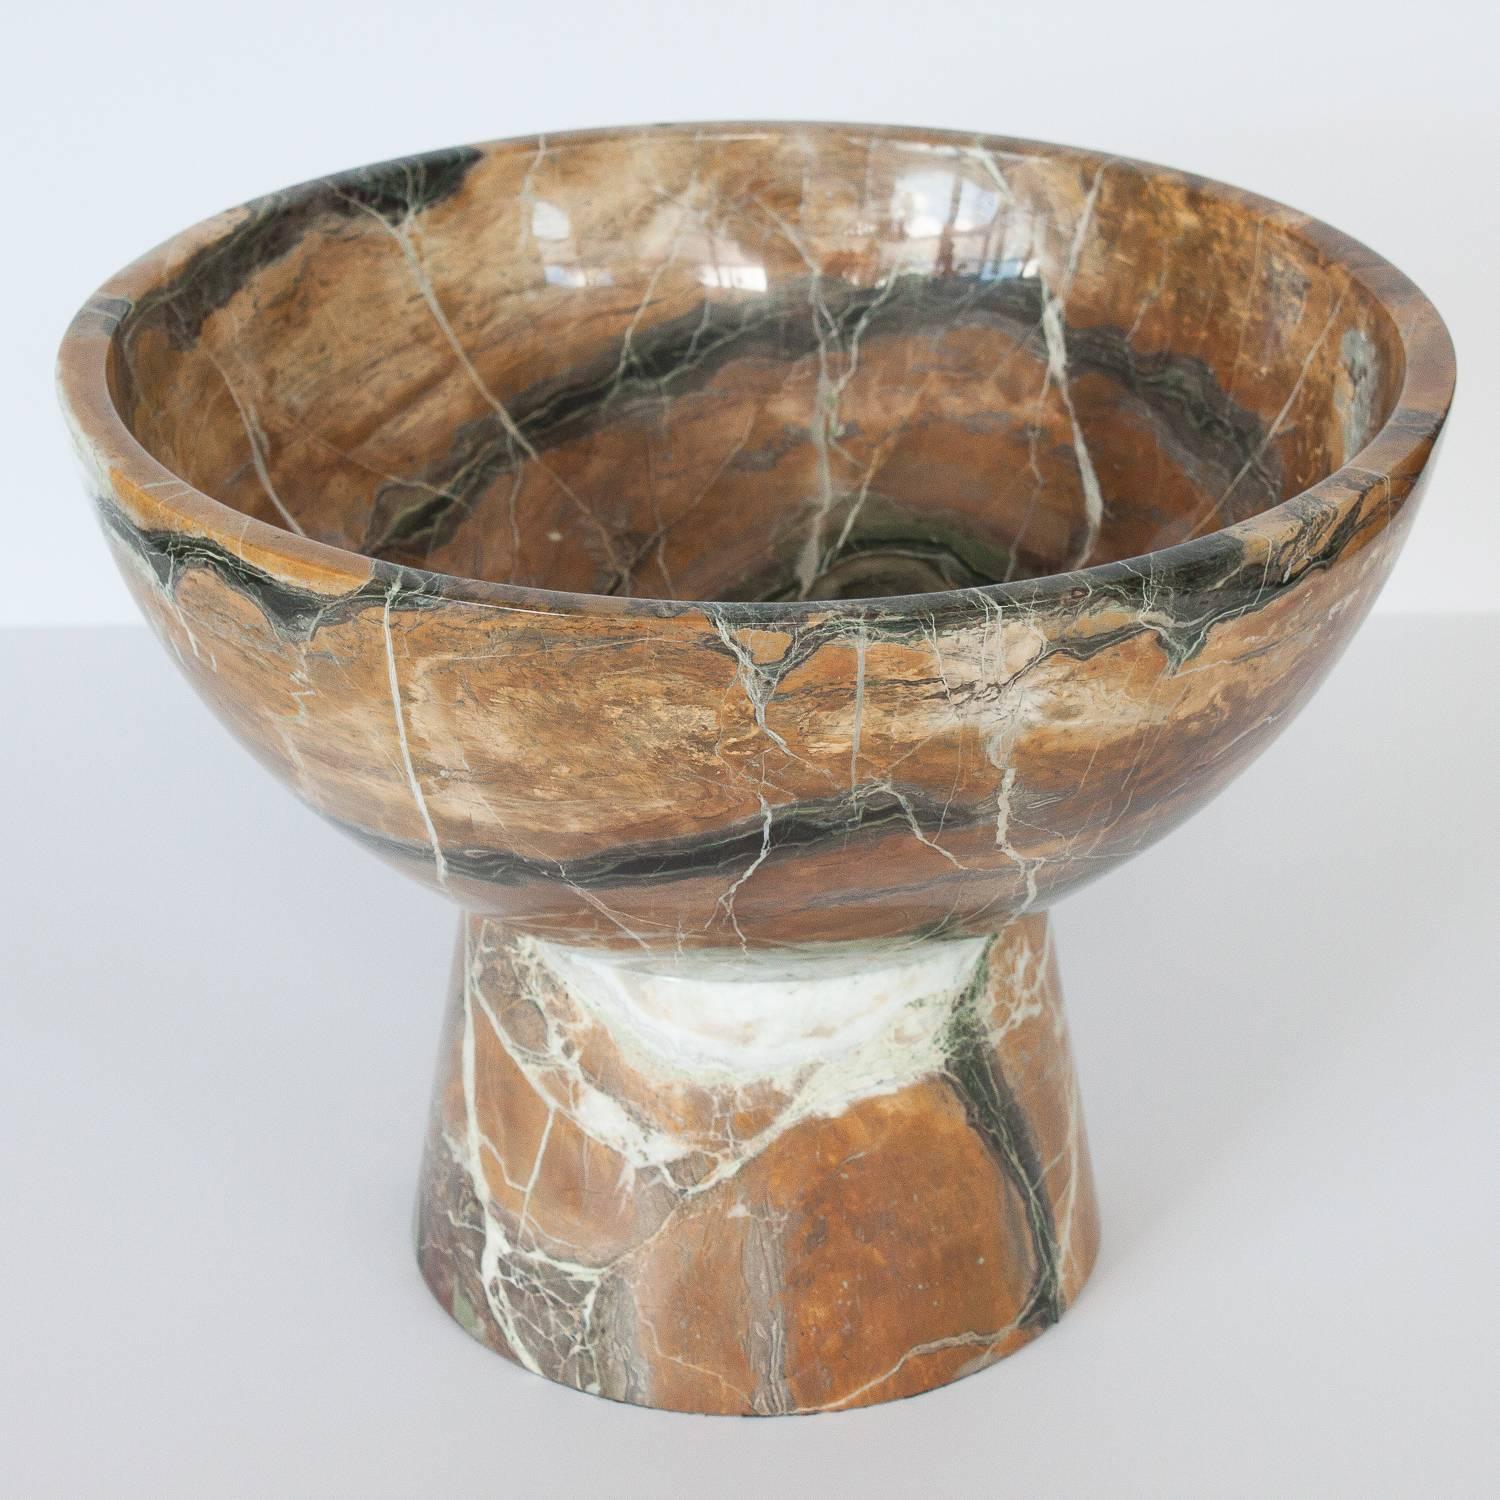 Stunning monumental solid marble pedestal bowl. Solid marble base with turned 5/8' thick round marble bowl. The stone is in earth-tones of brown, caramel, white, green and tan. Polished finish. Great scale as a centerpiece on a dining table.